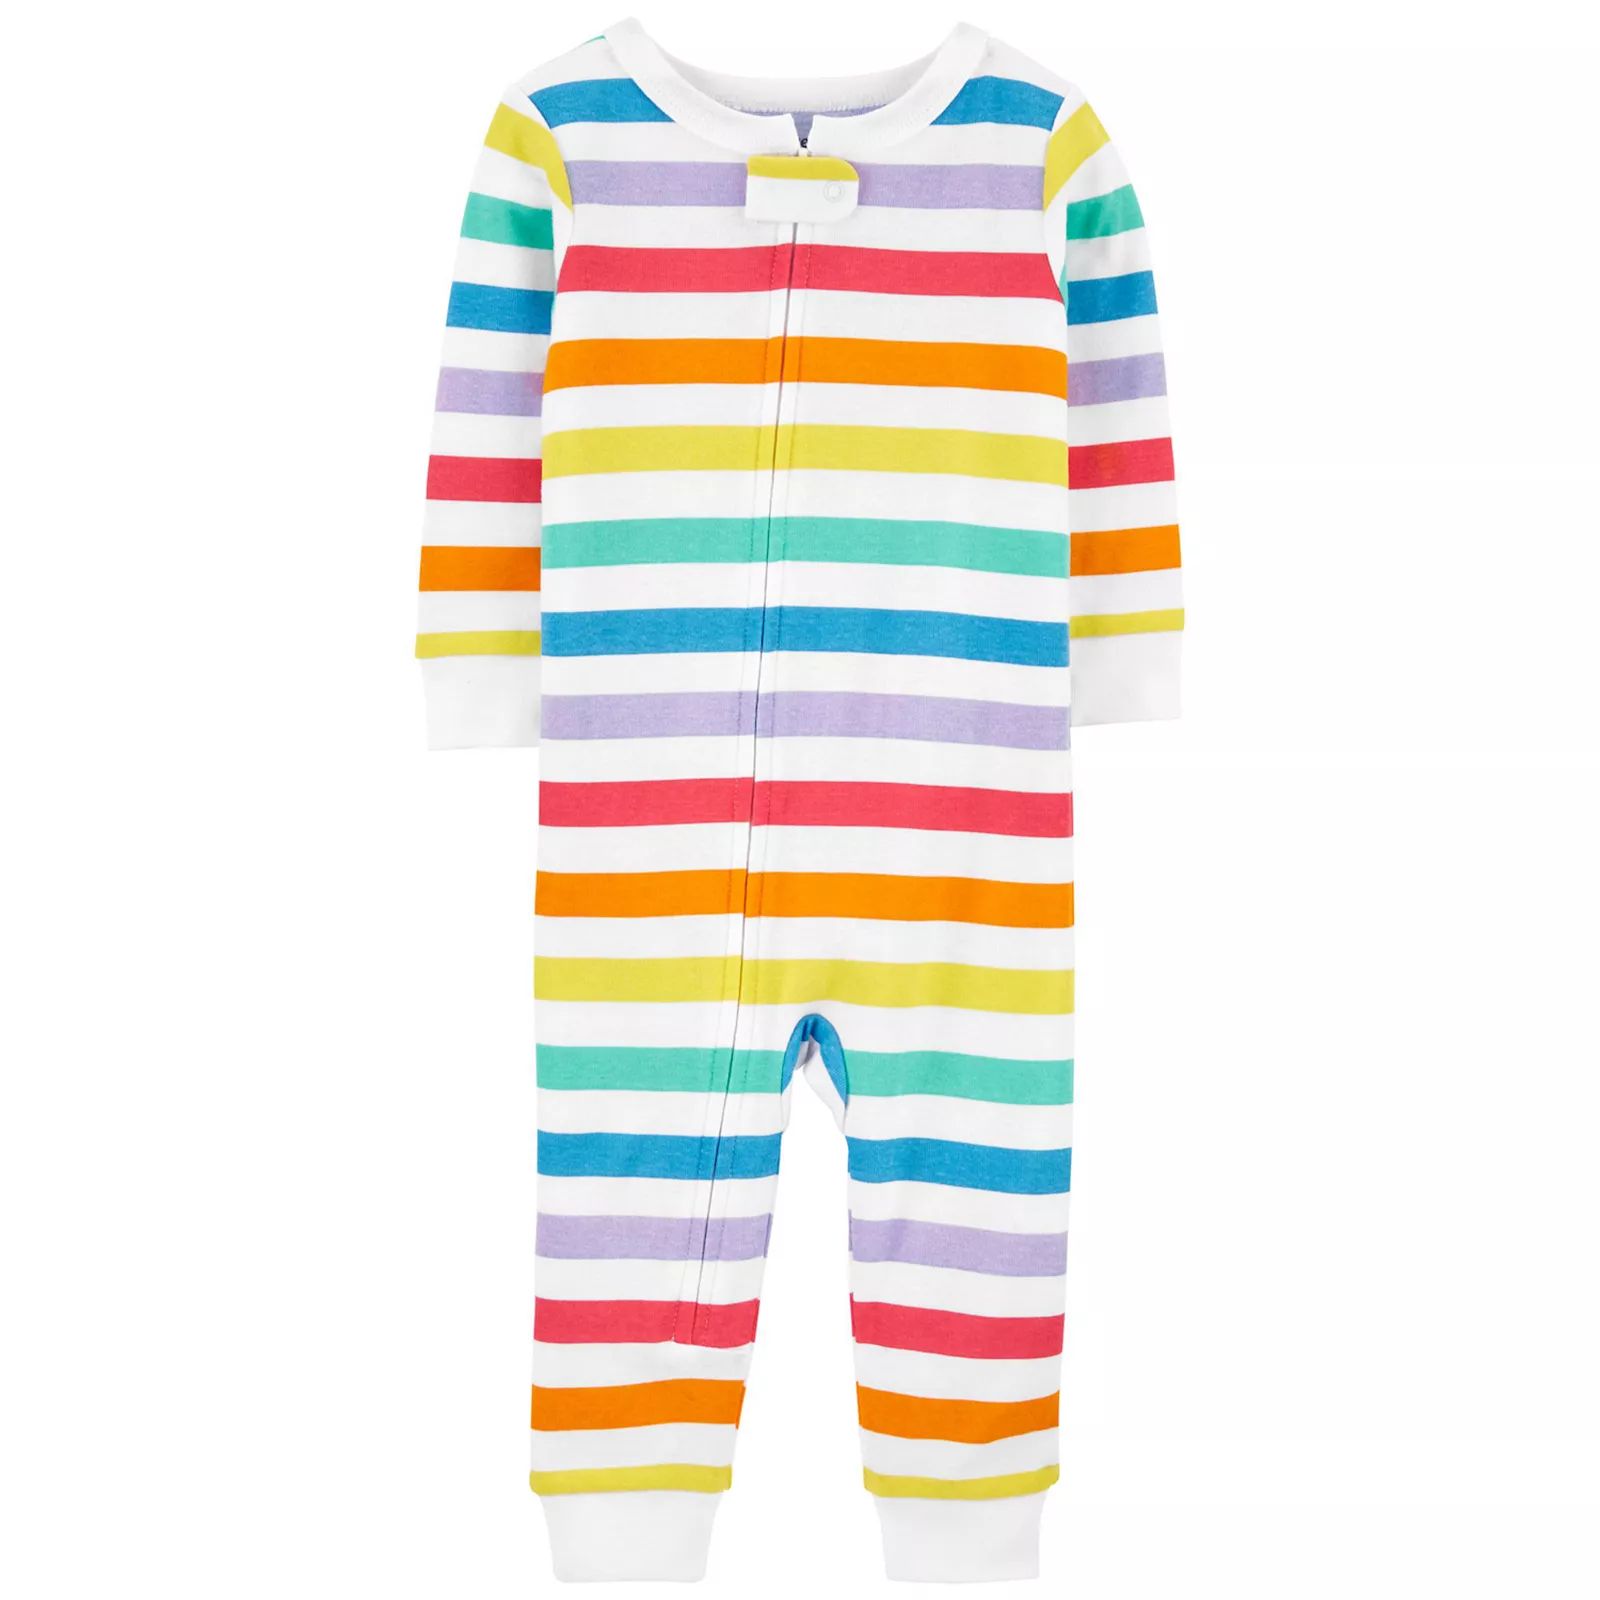 Baby Carter's Rainbow Stripe Footless Pajamas, Infant Boy's, Size: 24 Months, Pride | Kohl's